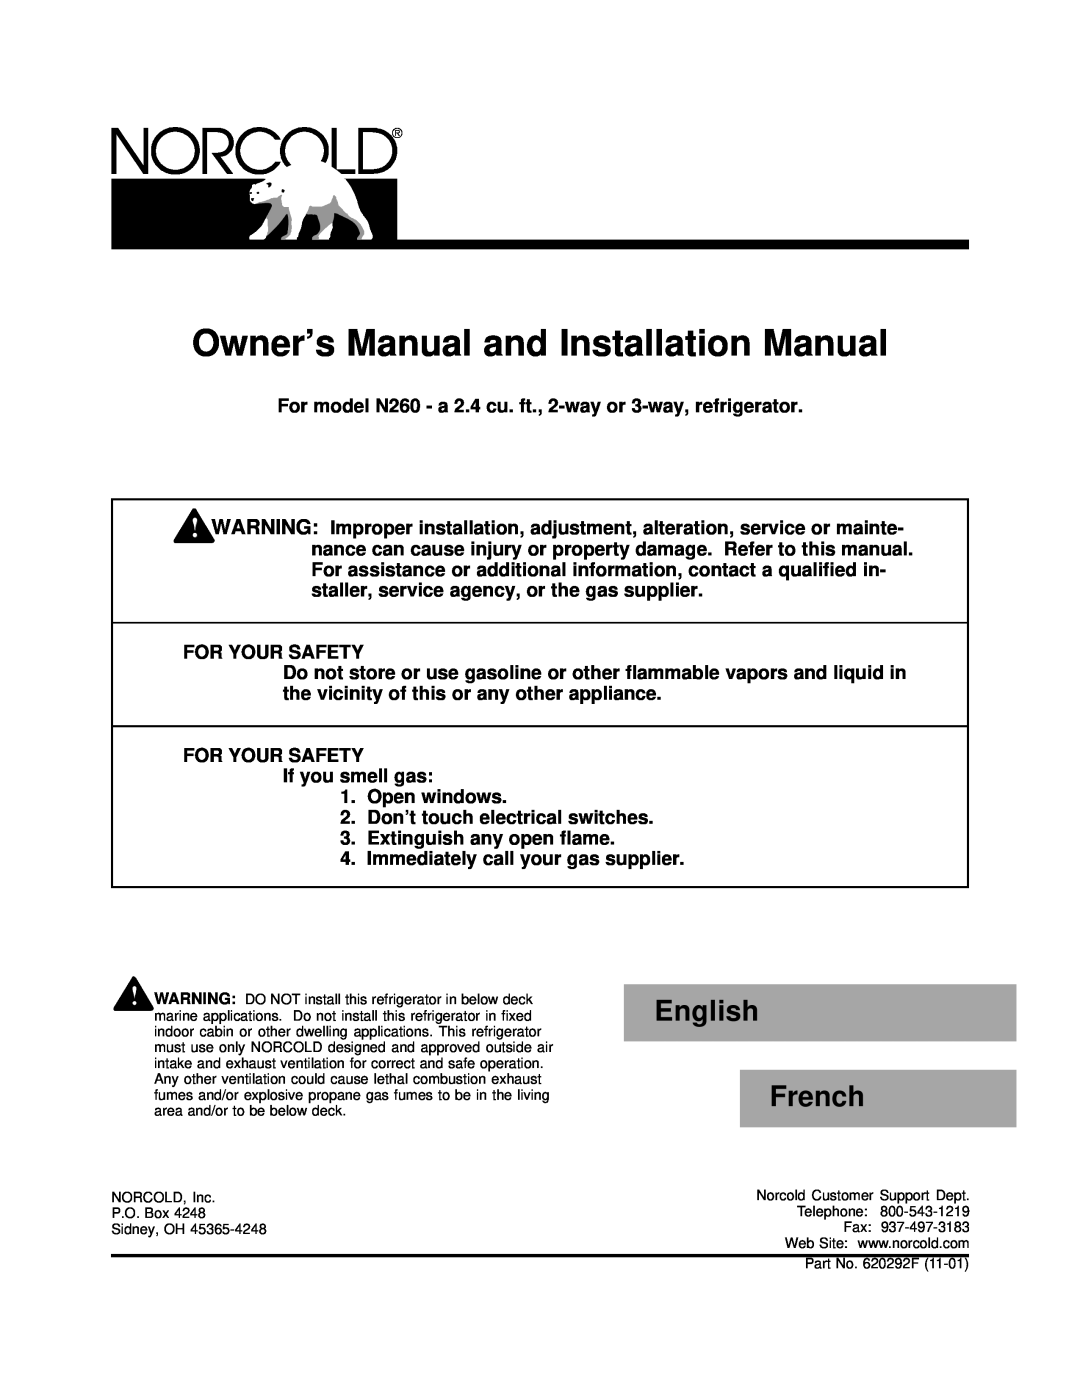 Norcold N260 owner manual English, French 